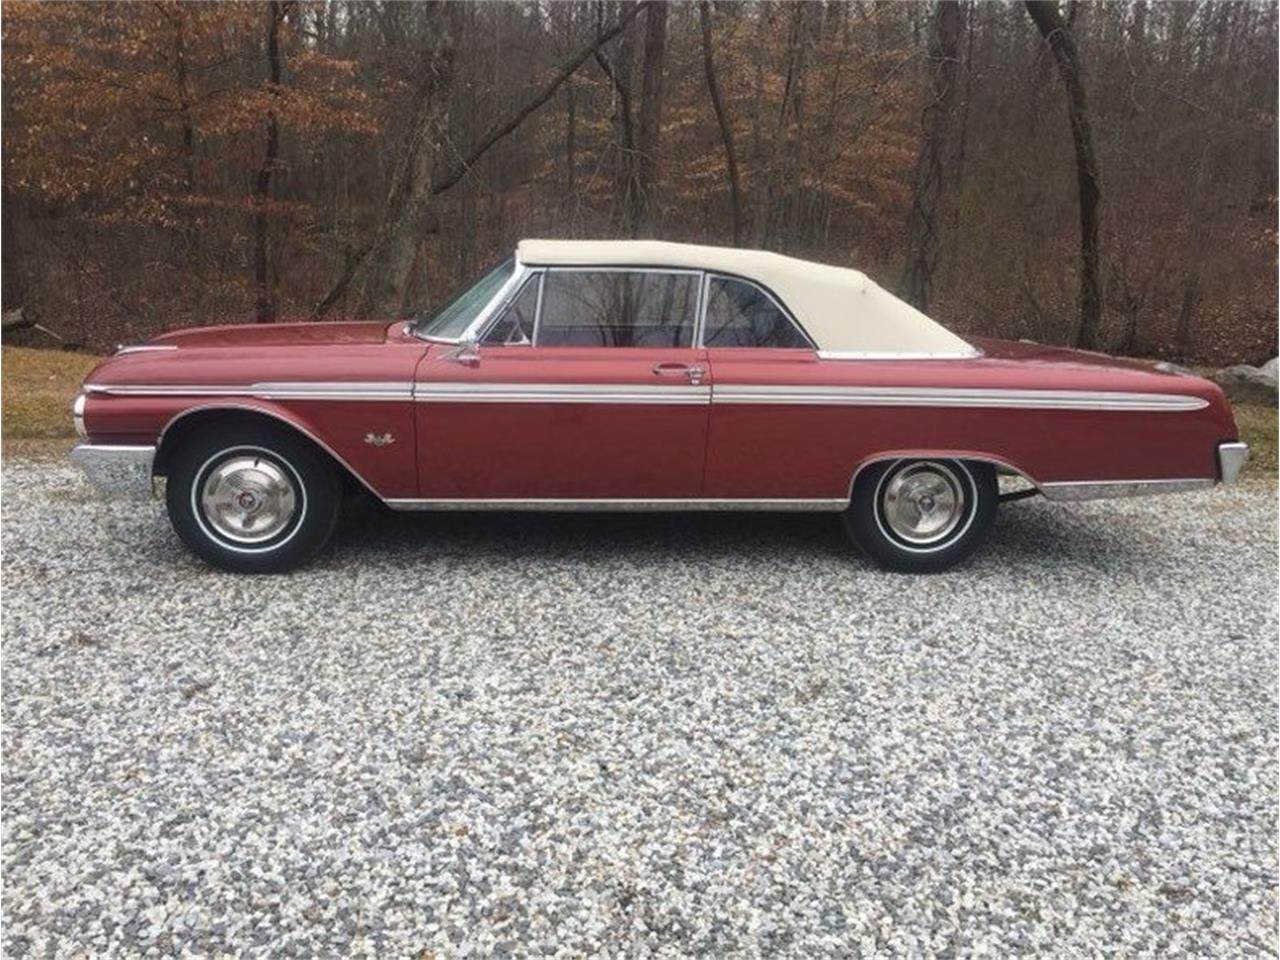 For Sale at Auction: 1962 Ford Galaxie in Greensboro, North Carolina for sale in Greensboro, NC